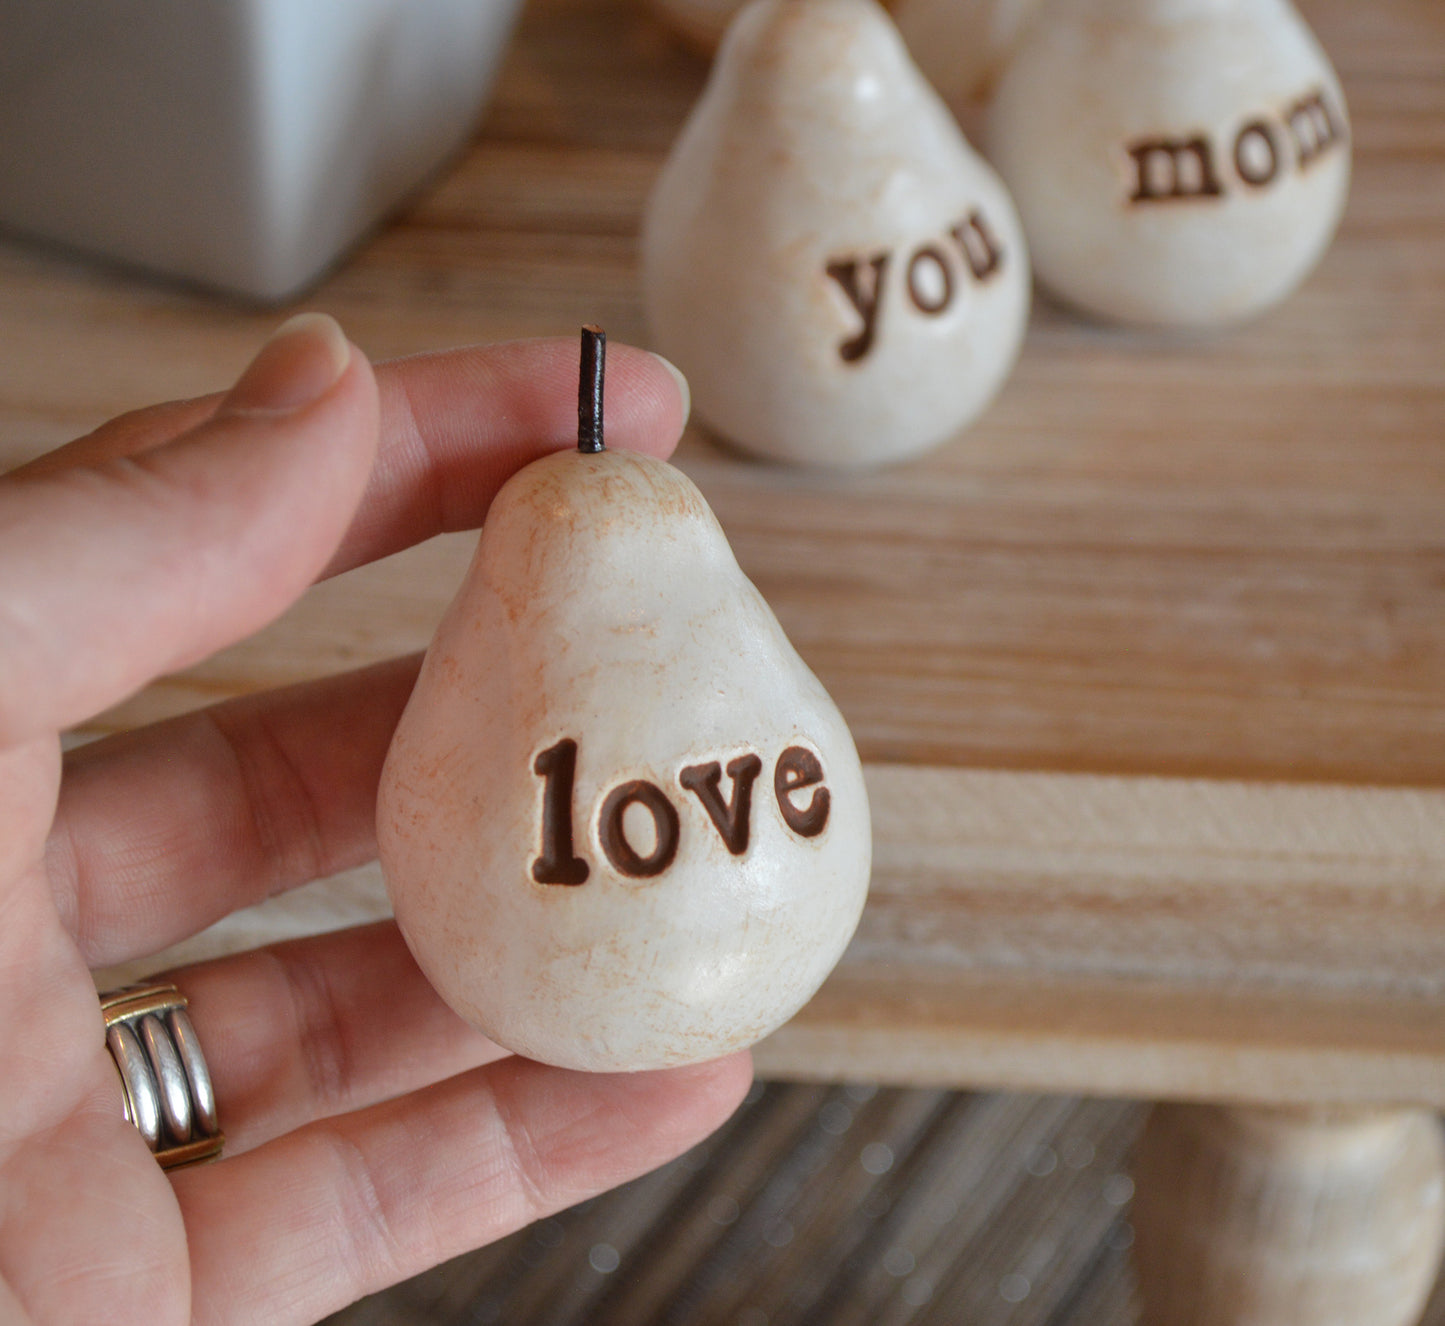 Gift for mom / Mother's Day gift for mothers / 3 white love you mom pears / FREE SHIPPING